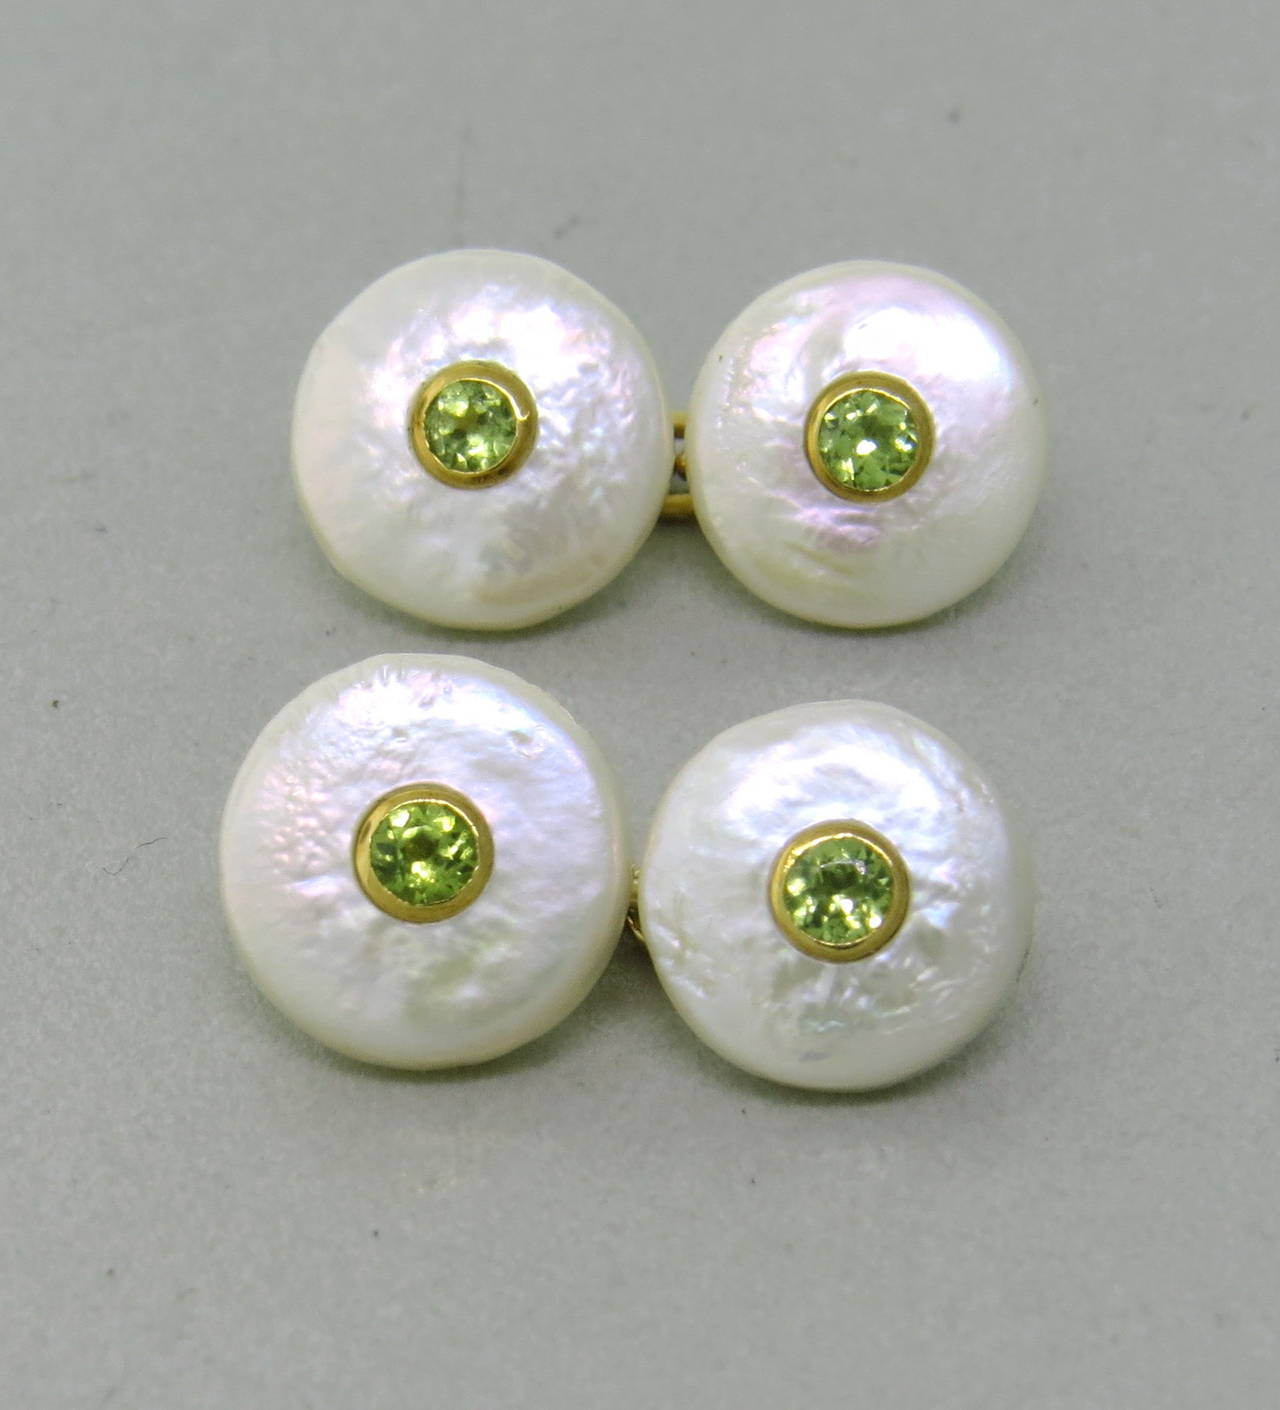 Trianon 18k gold cufflinks with pearl top and peridot in the center. Top measures 12mm in diameter. Weight - 5.8 gr